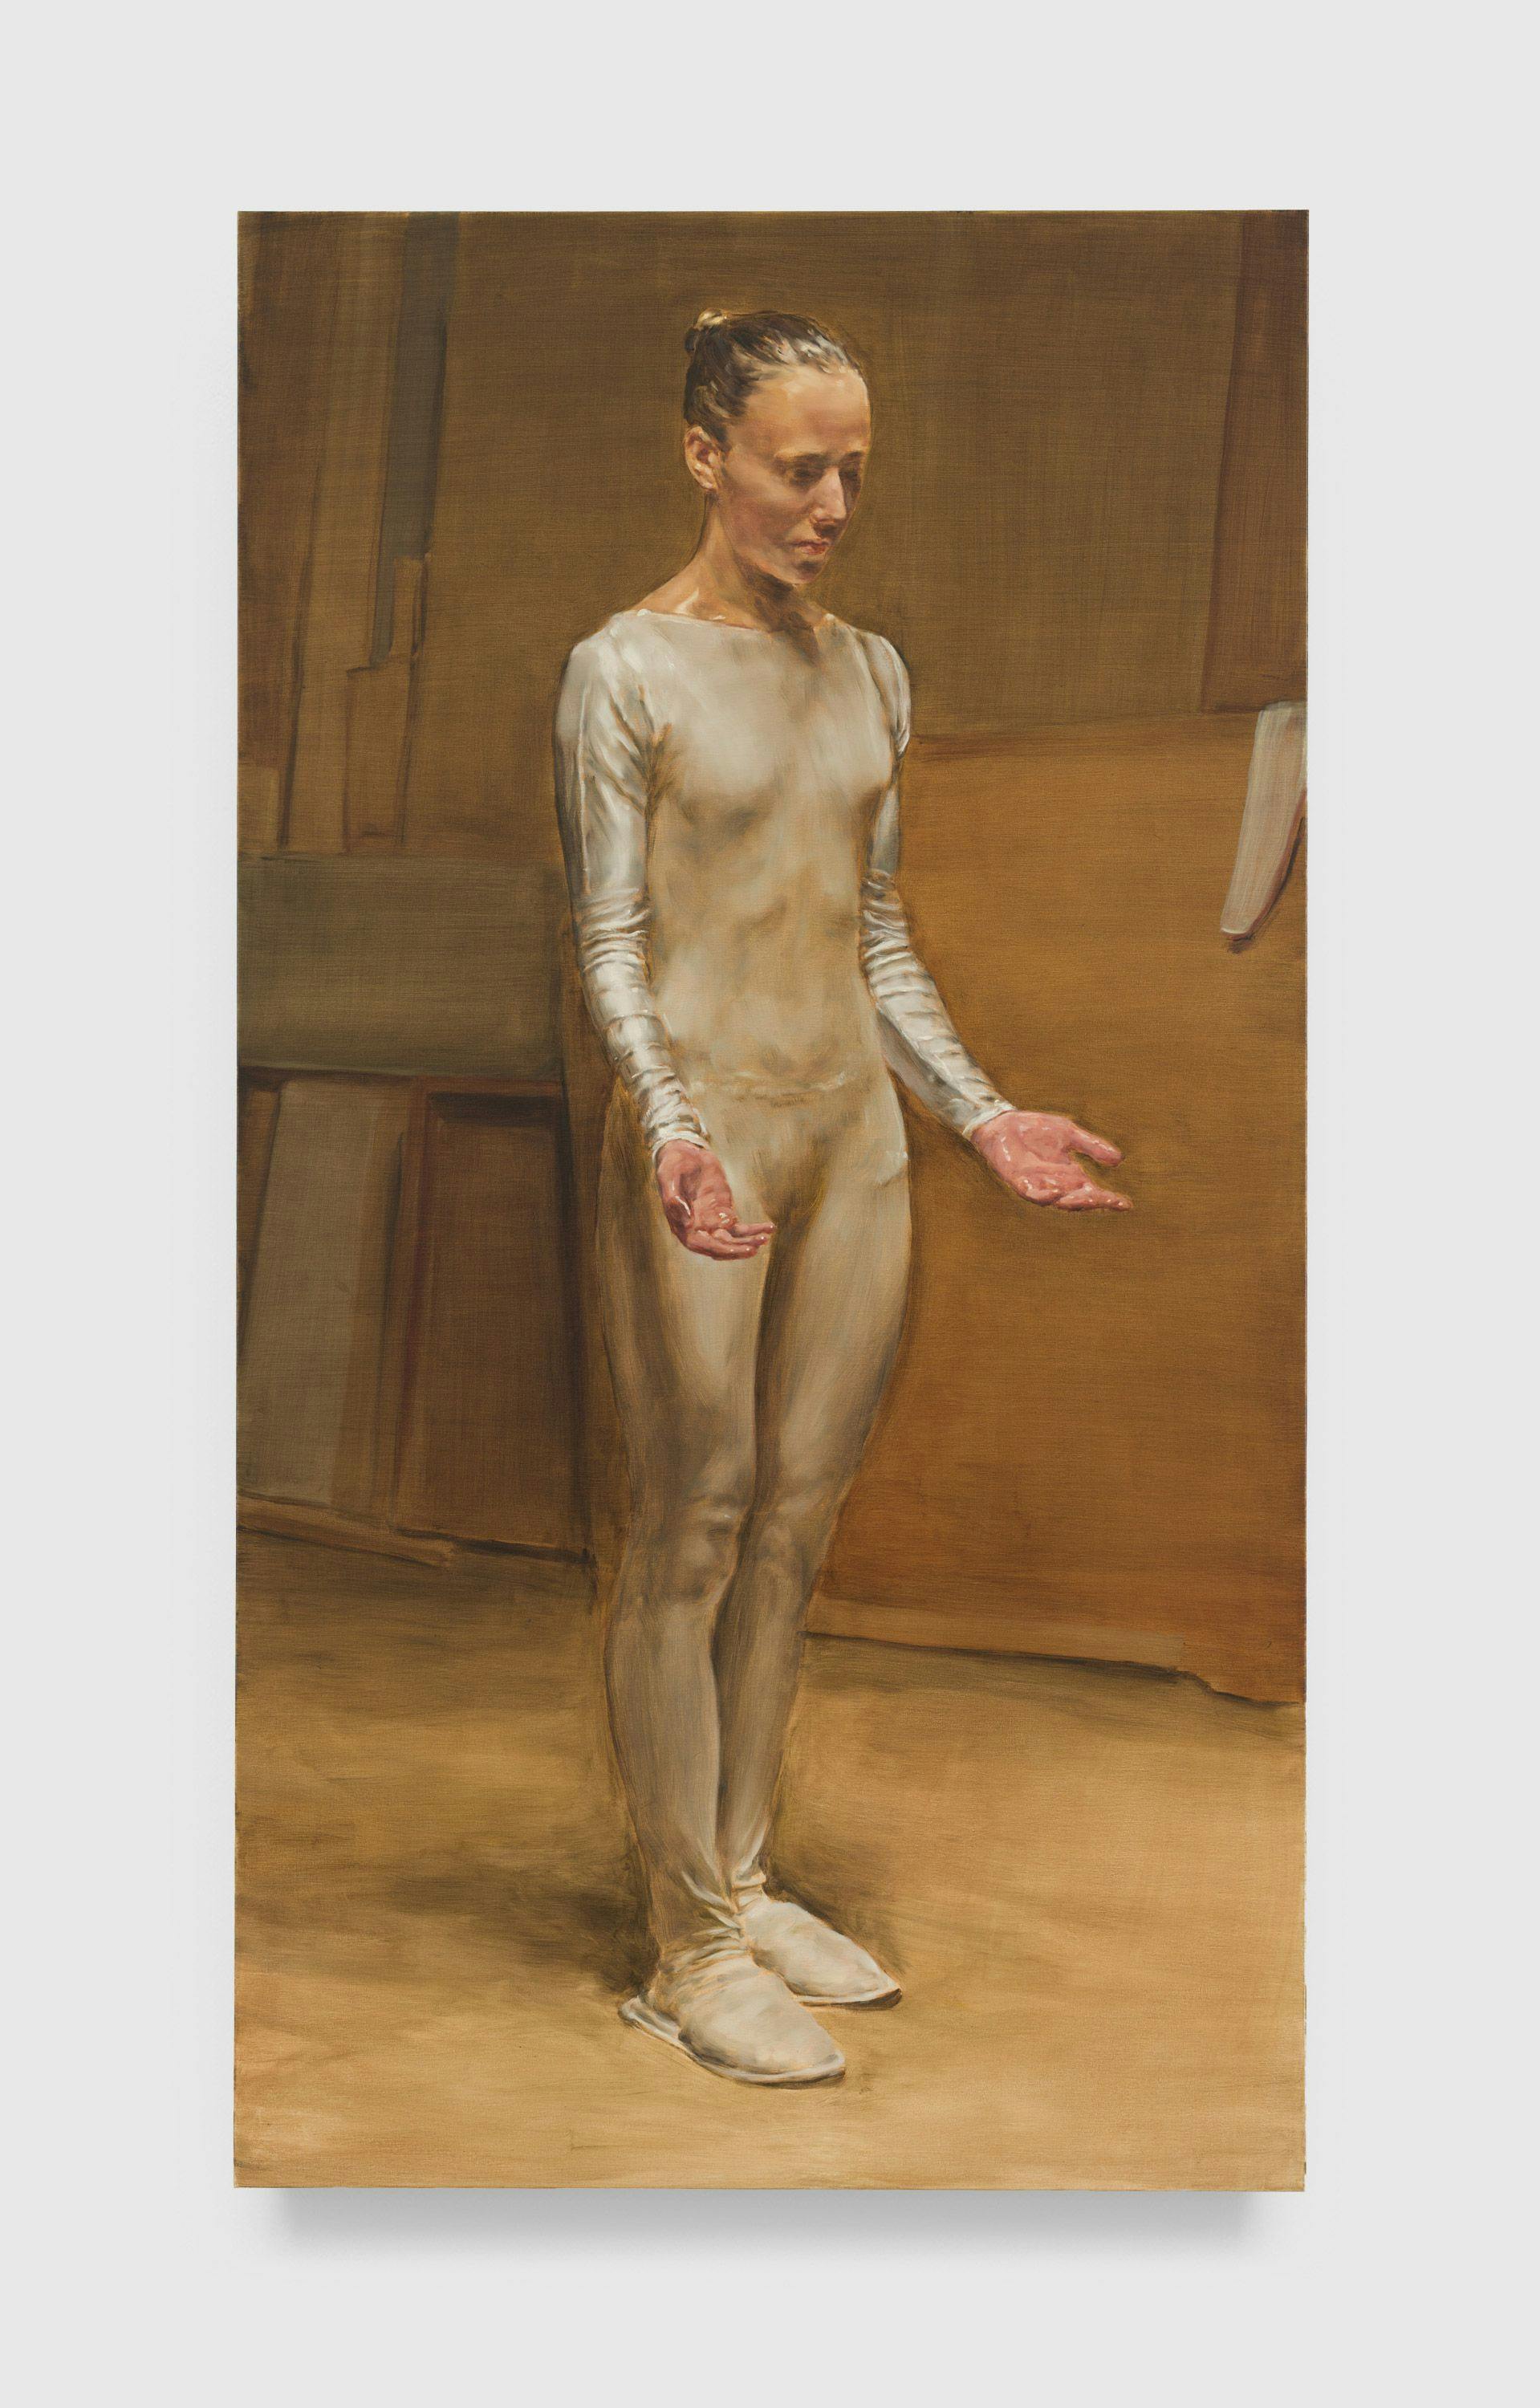 A painting by Michaël Borremans, titled The Virgin, dated 2013.